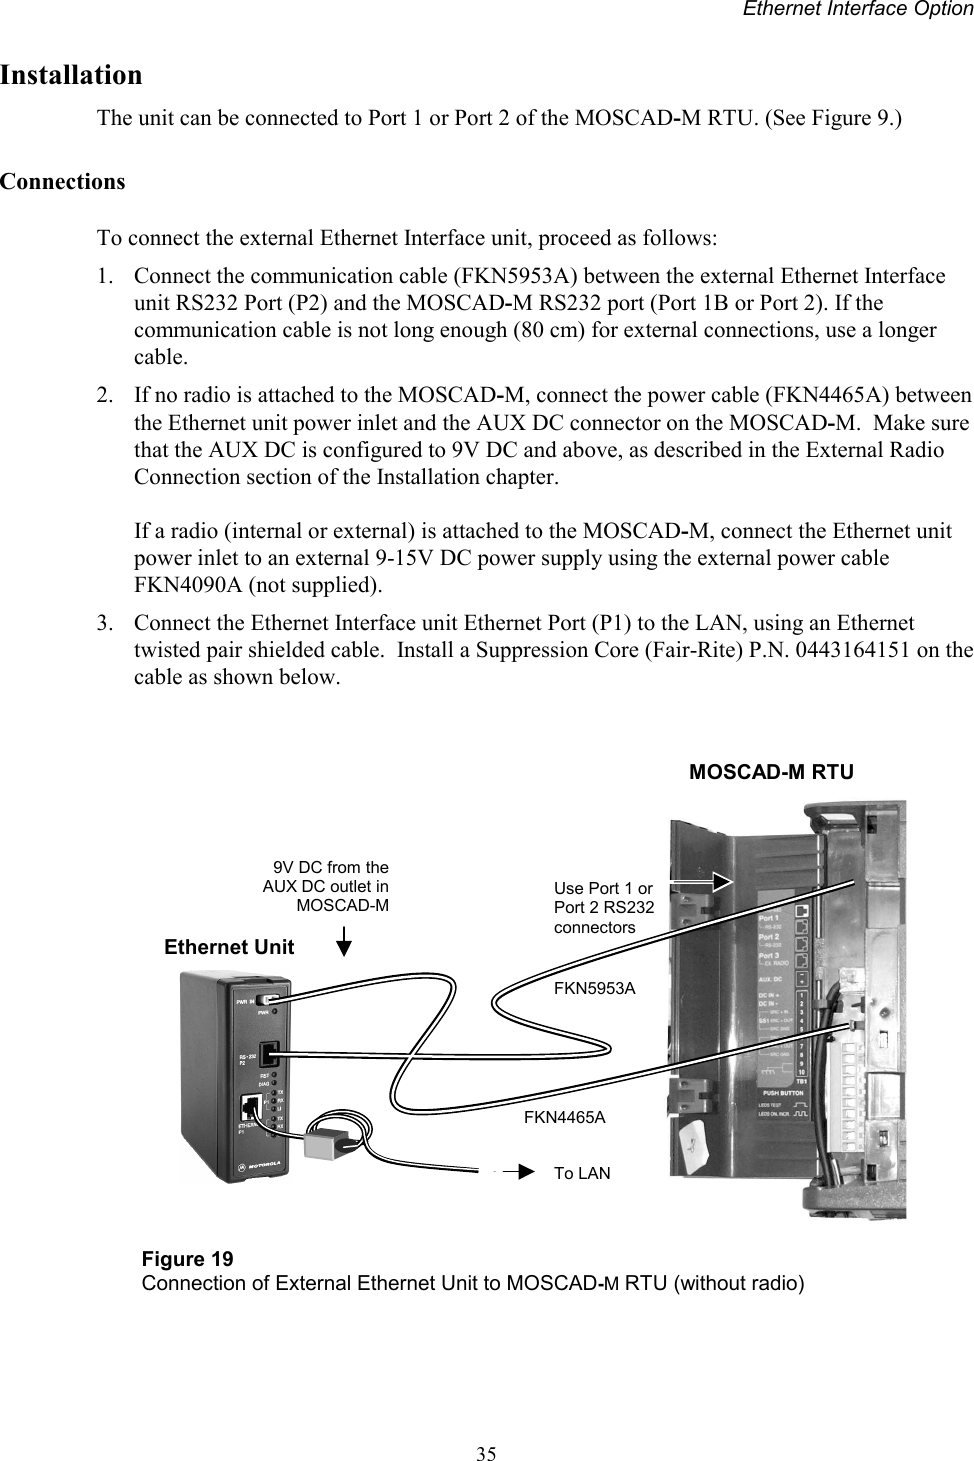 Ethernet Interface Option35InstallationThe unit can be connected to Port 1 or Port 2 of the MOSCAD-M RTU. (See Figure 9.)ConnectionsTo connect the external Ethernet Interface unit, proceed as follows:1. Connect the communication cable (FKN5953A) between the external Ethernet Interfaceunit RS232 Port (P2) and the MOSCAD-M RS232 port (Port 1B or Port 2). If thecommunication cable is not long enough (80 cm) for external connections, use a longercable.2. If no radio is attached to the MOSCAD-M, connect the power cable (FKN4465A) betweenthe Ethernet unit power inlet and the AUX DC connector on the MOSCAD-M.  Make surethat the AUX DC is configured to 9V DC and above, as described in the External RadioConnection section of the Installation chapter.If a radio (internal or external) is attached to the MOSCAD-M, connect the Ethernet unitpower inlet to an external 9-15V DC power supply using the external power cableFKN4090A (not supplied).3. Connect the Ethernet Interface unit Ethernet Port (P1) to the LAN, using an Ethernettwisted pair shielded cable.  Install a Suppression Core (Fair-Rite) P.N. 0443164151 on thecable as shown below.Figure 19Connection of External Ethernet Unit to MOSCAD-M RTU (without radio)FKN5953ATo LAN9V DC from theAUX DC outlet inMOSCAD-MFKN4465AEthernet UnitUse Port 1 orPort 2 RS232connectorsMOSCAD-M RTU